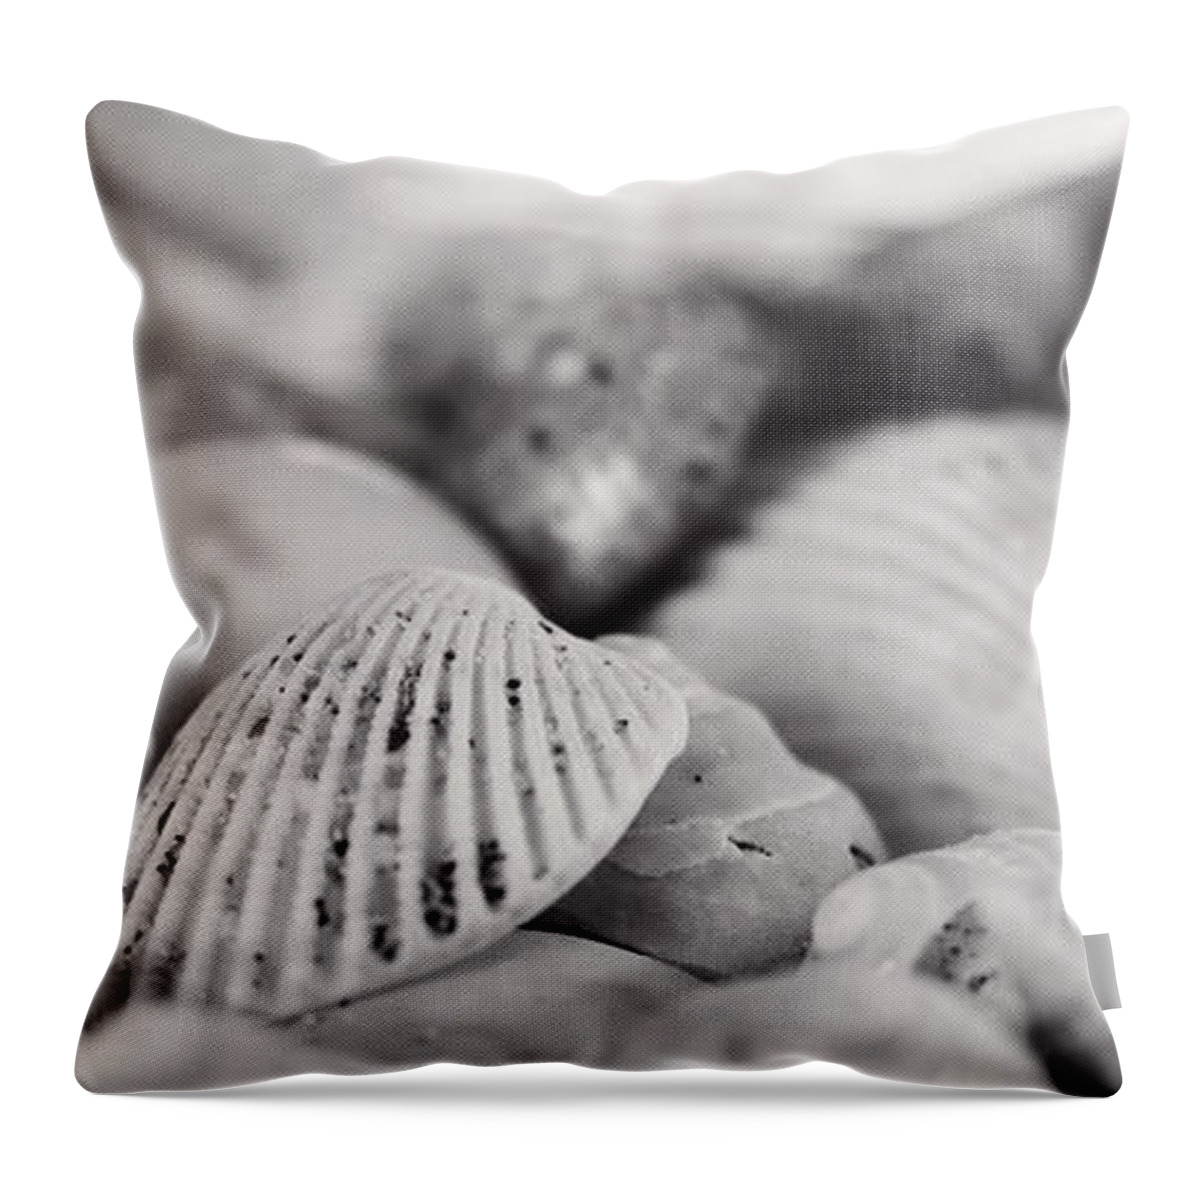 Monochrome Throw Pillow featuring the photograph Shells XV by Cassandra Buckley